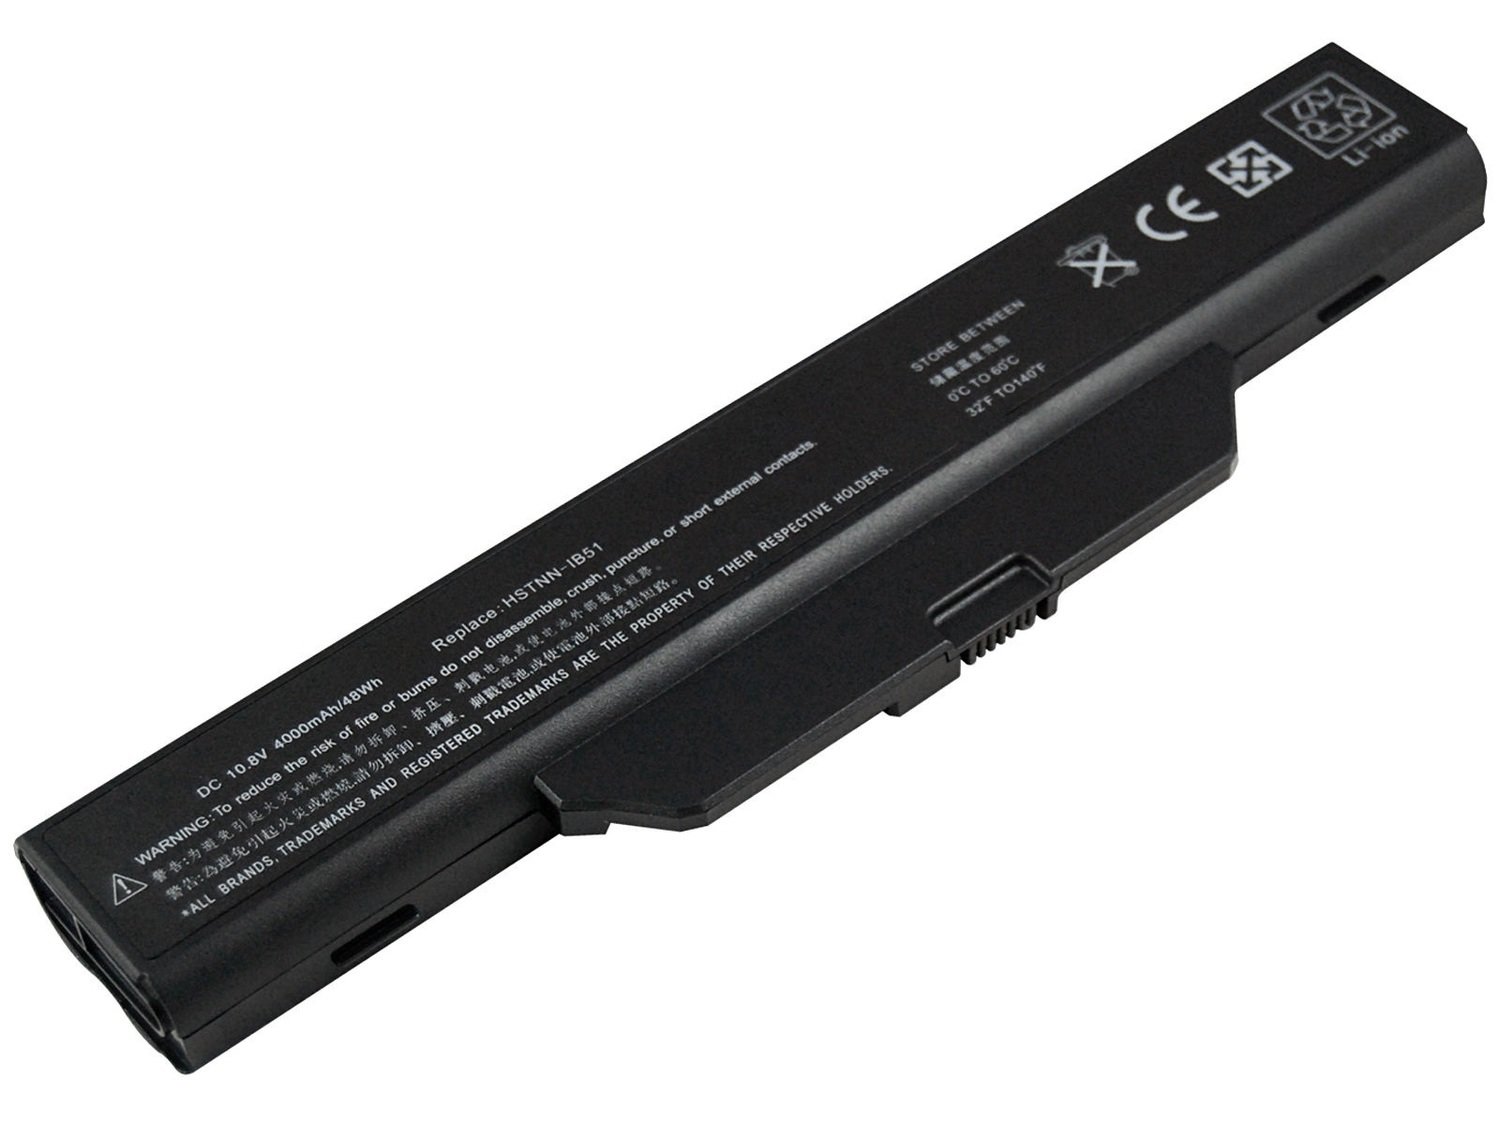 compatible for hp 610, 6720s 6730s 6735s 6820s 6830s 550 laptop battery